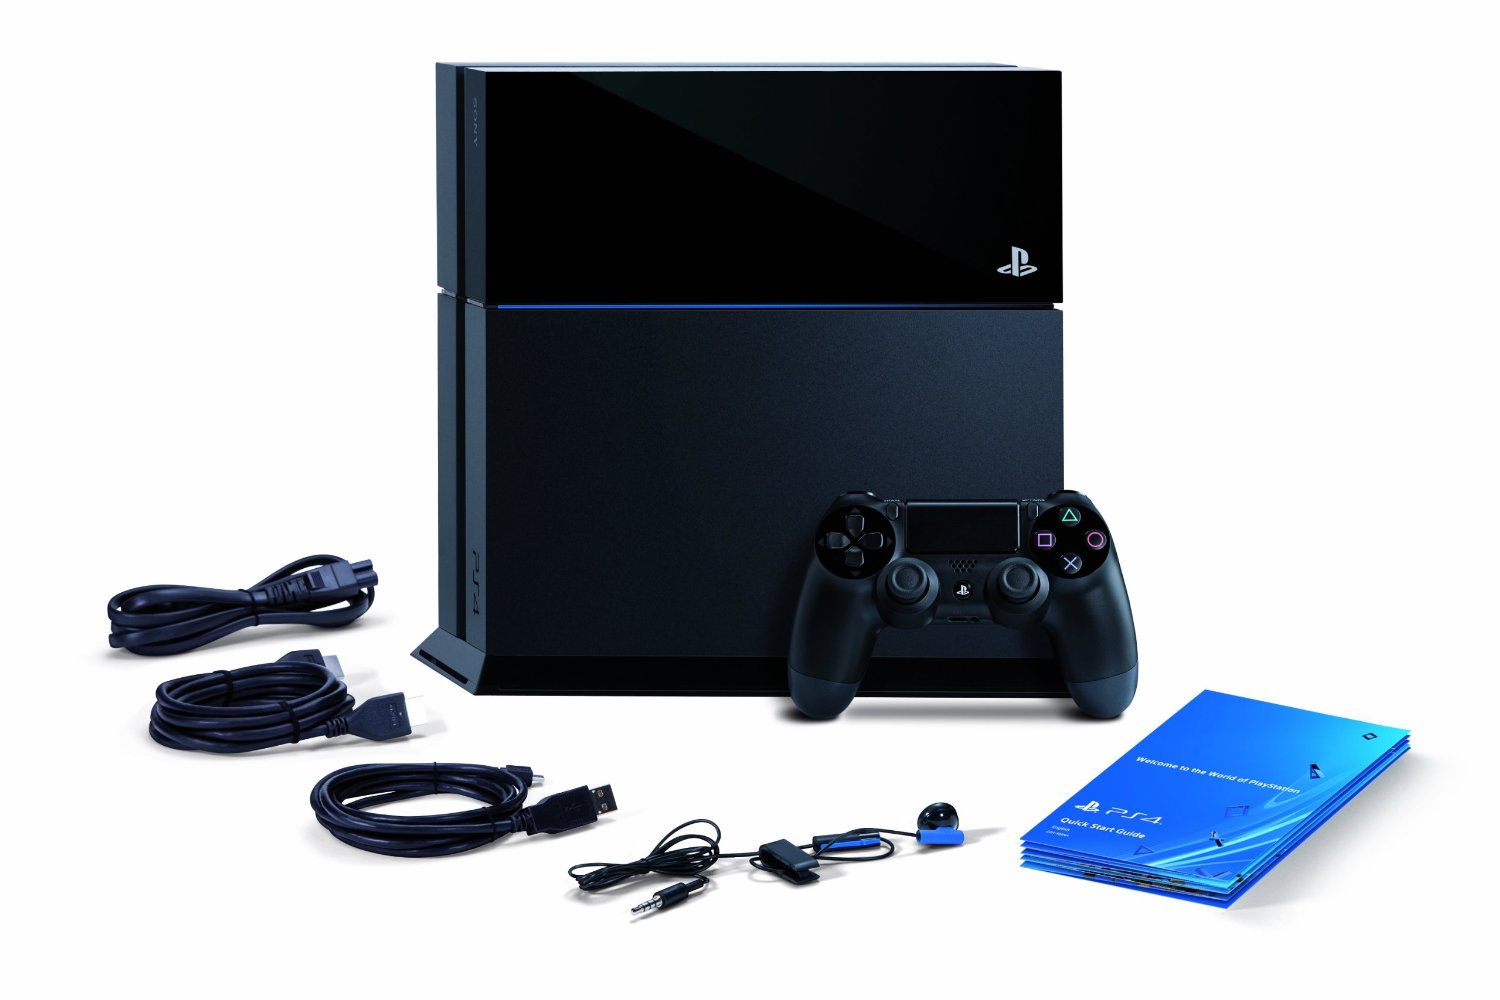 PlayStation 4 Release Date Official: November 15